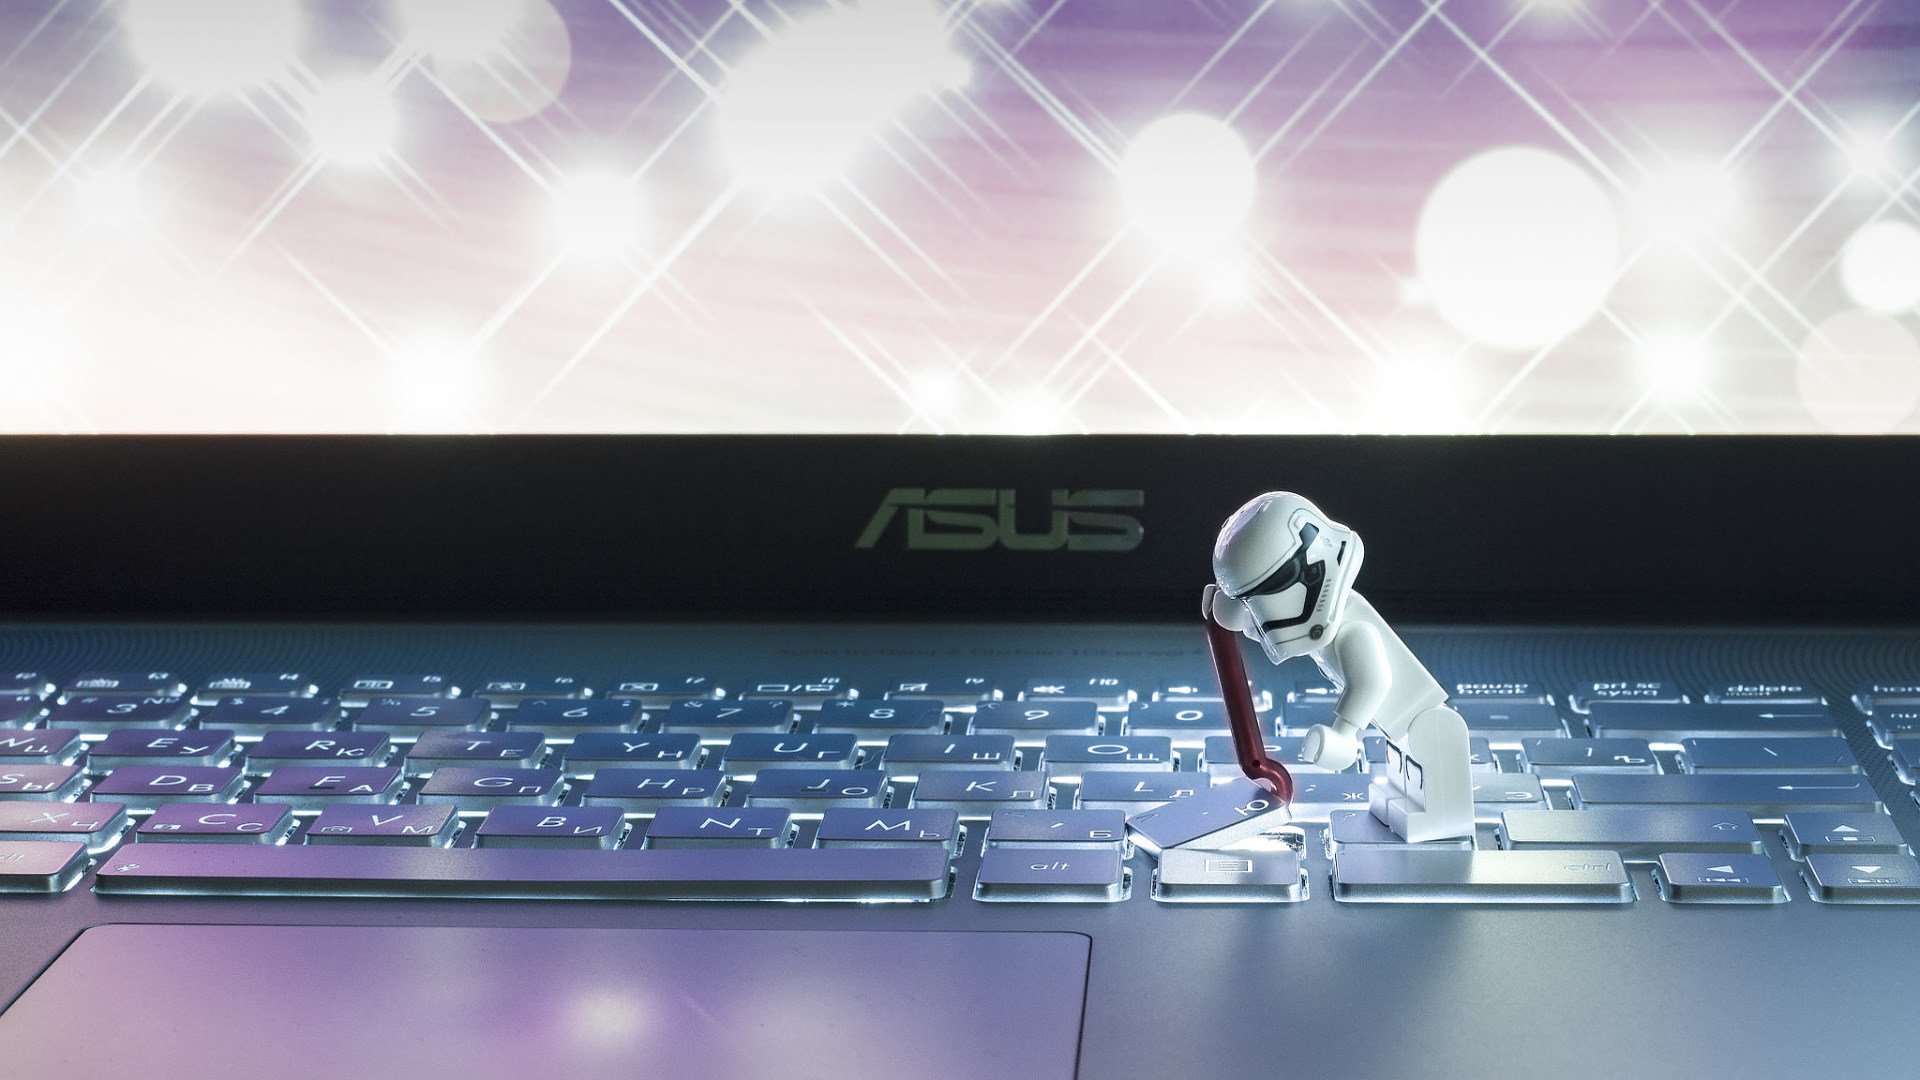 General 1920x1080 500px toys keyboards LEGO Star Wars ASUS laptop humor stormtrooper movie characters